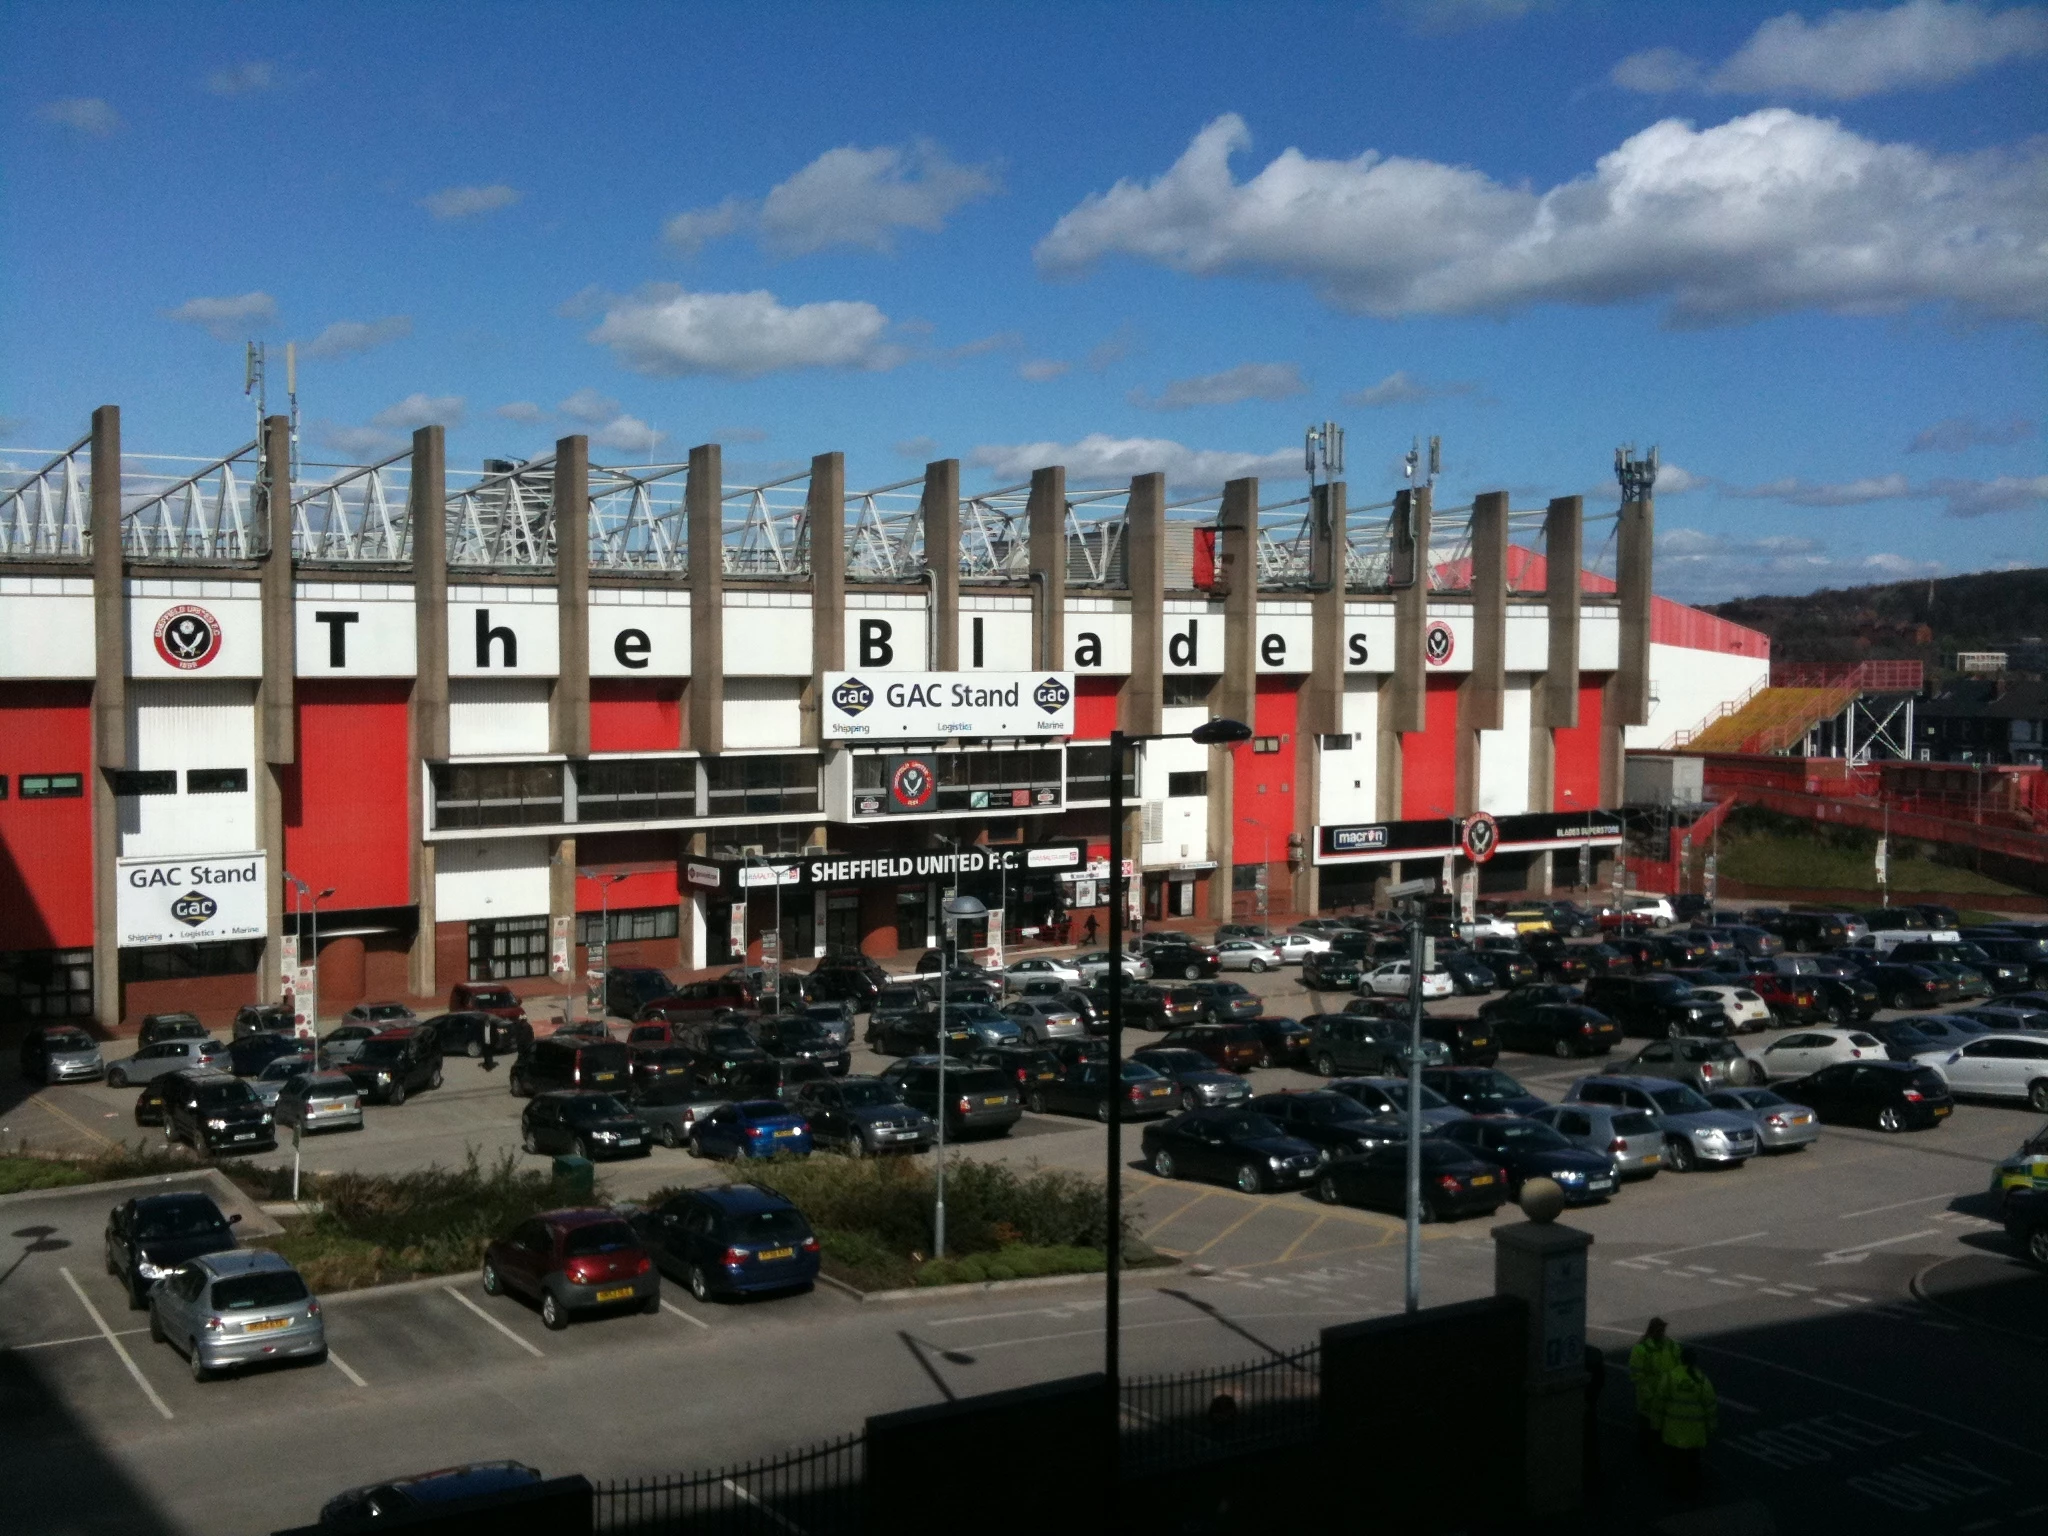 Bramall Lane, Home of the Sheffield United, "The Blades"